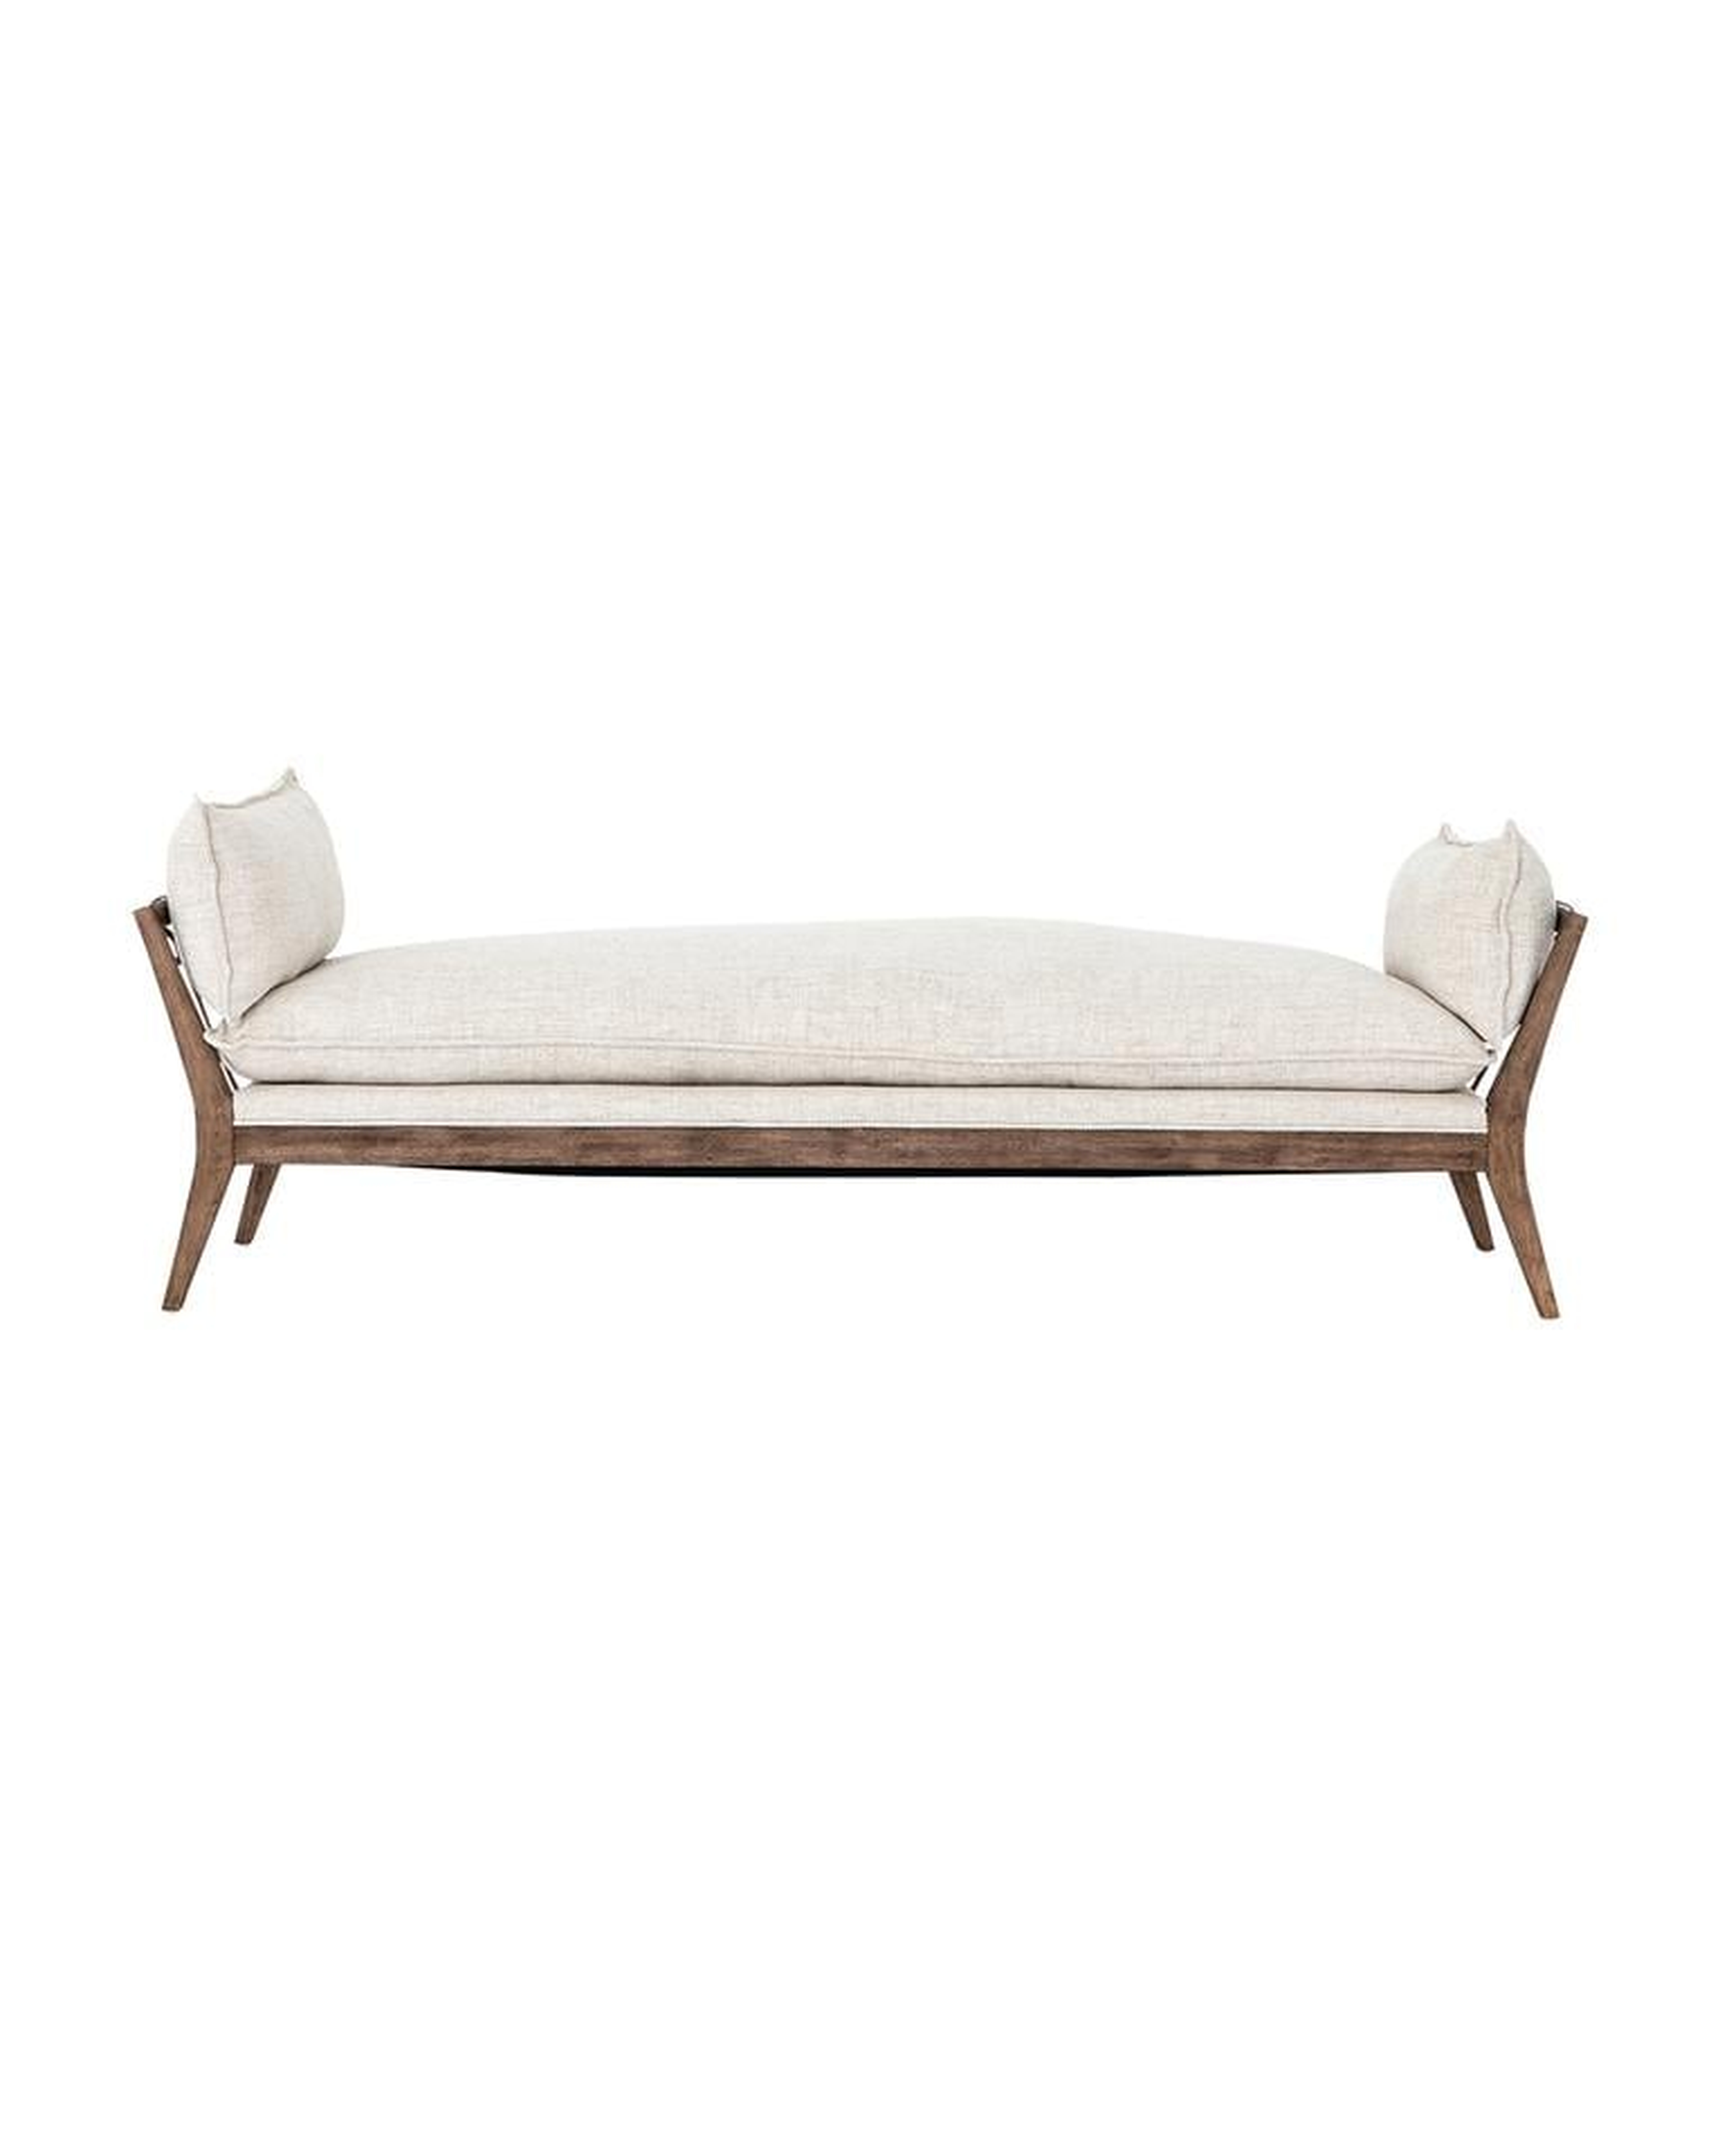 ABERDEEN DAYBED - McGee & Co.